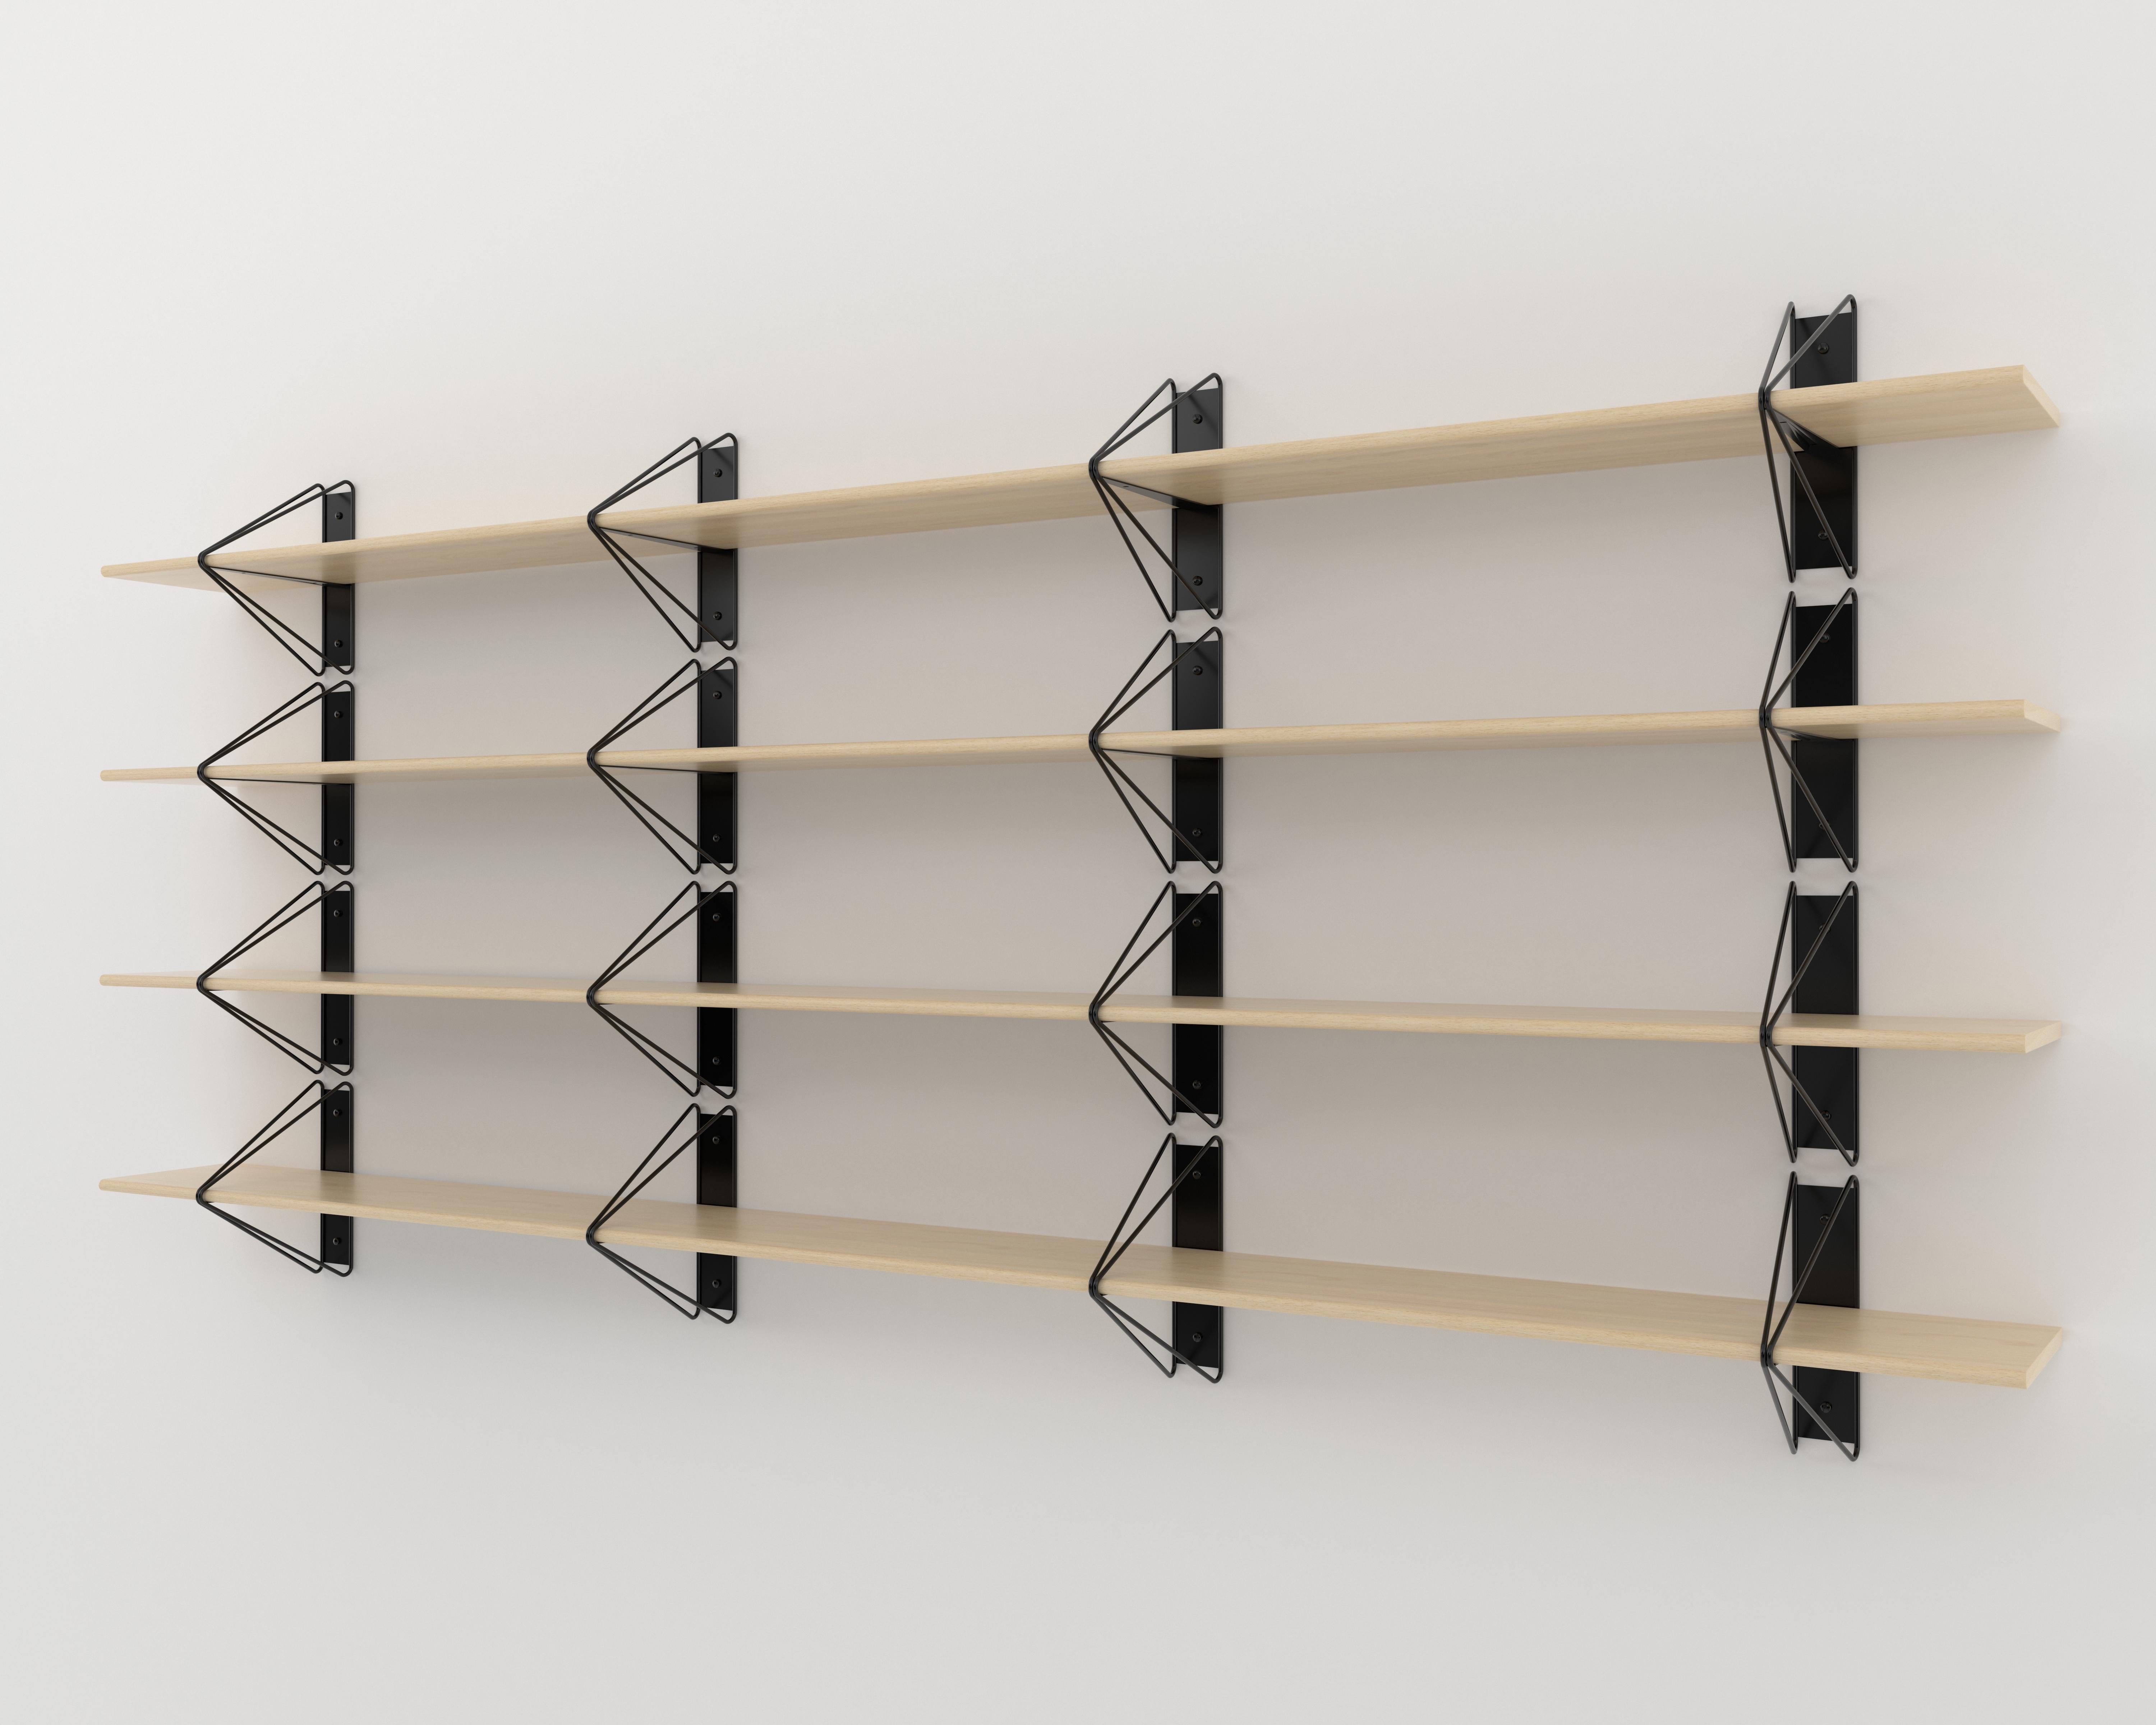 Metal Set of 4 Strut Shelves from Souda, Black and Walnut, Made to Order For Sale